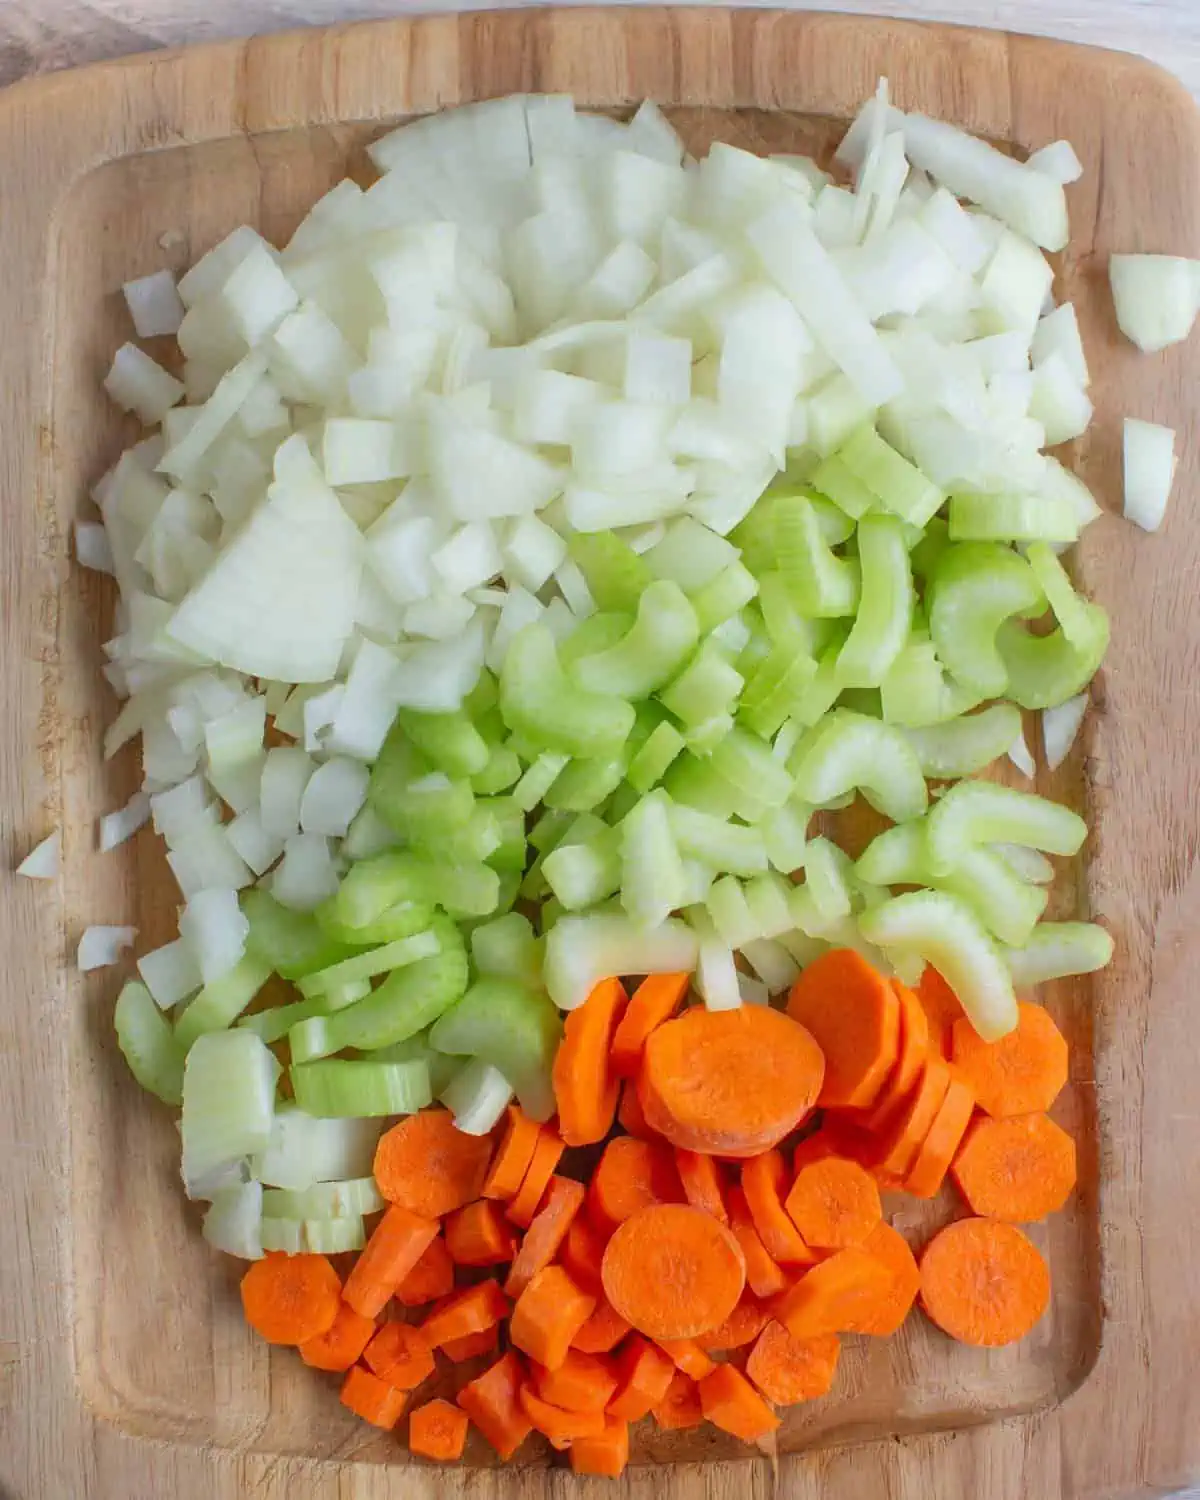 Wooden cutting board with diced onion, celery, and carrots. 